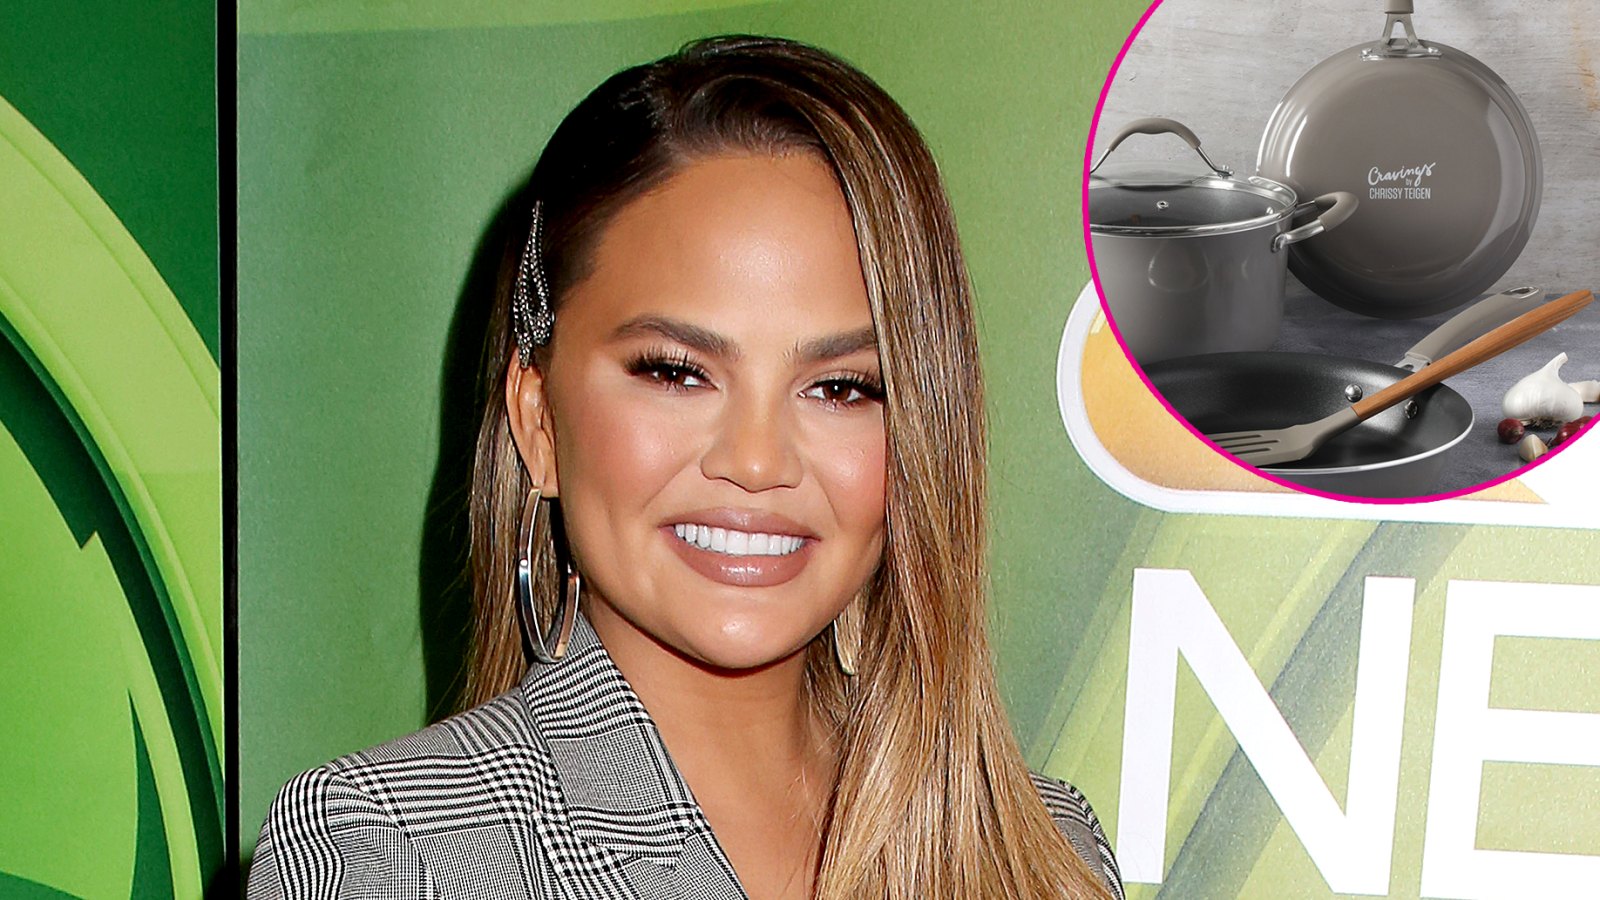 https://www.usmagazine.com/wp-content/uploads/2019/08/Chrissy-Teigen-Wants-to-Donate-Items-From-Her-Cookware-Line.jpg?crop=164px%2C0px%2C1836px%2C1037px&resize=1600%2C900&quality=86&strip=all